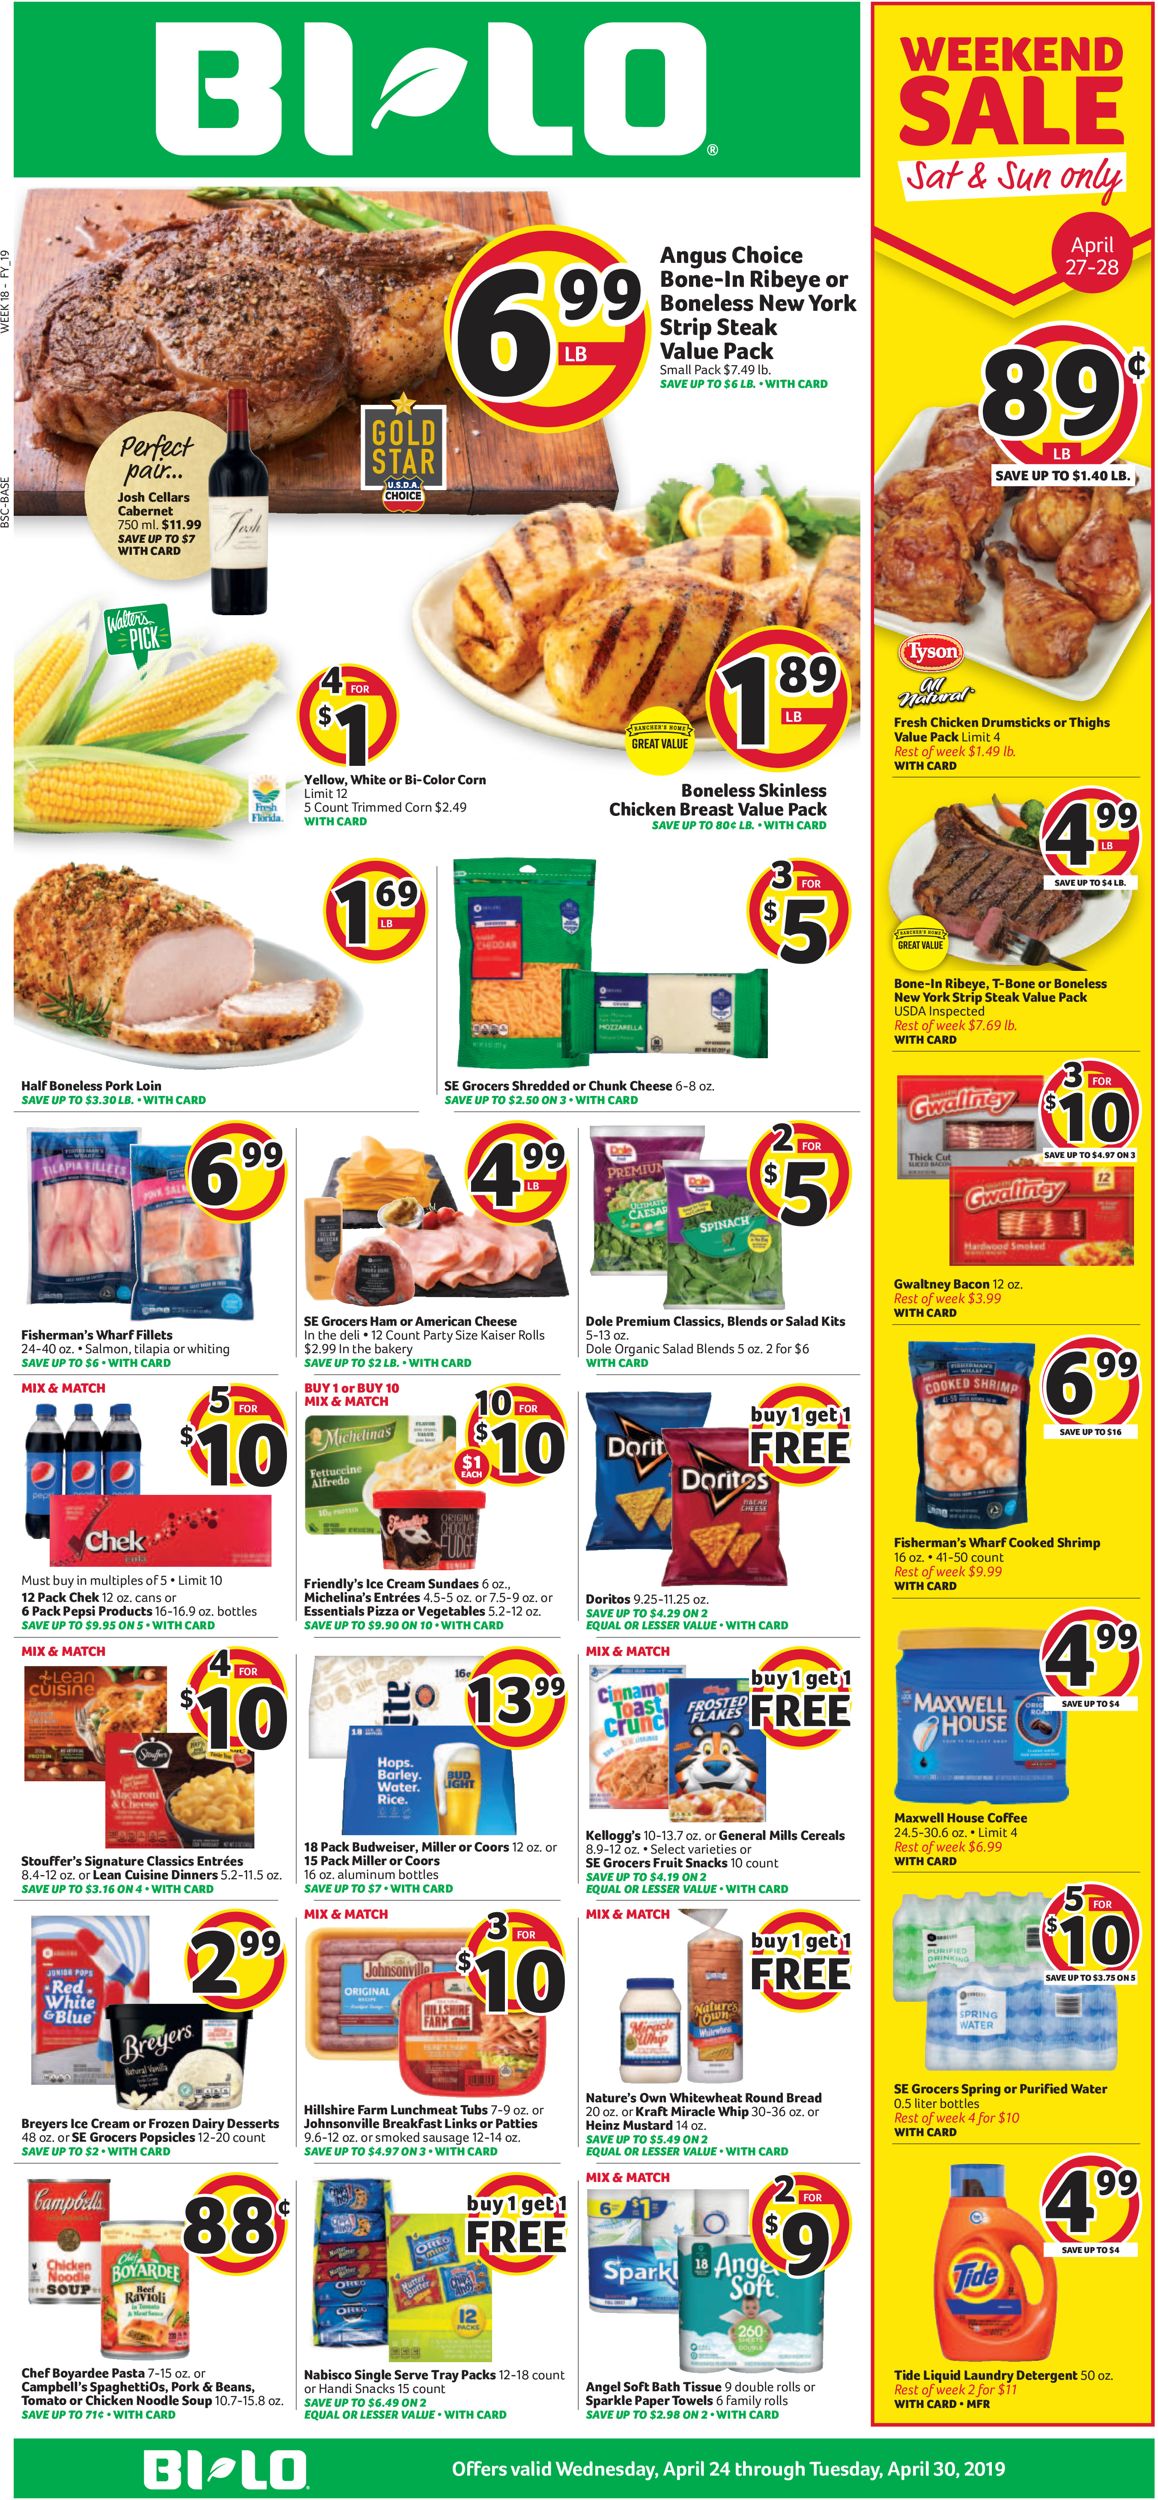 BI-LO Current weekly ad 05/01 - 05/07/2019 - frequent-ads.com